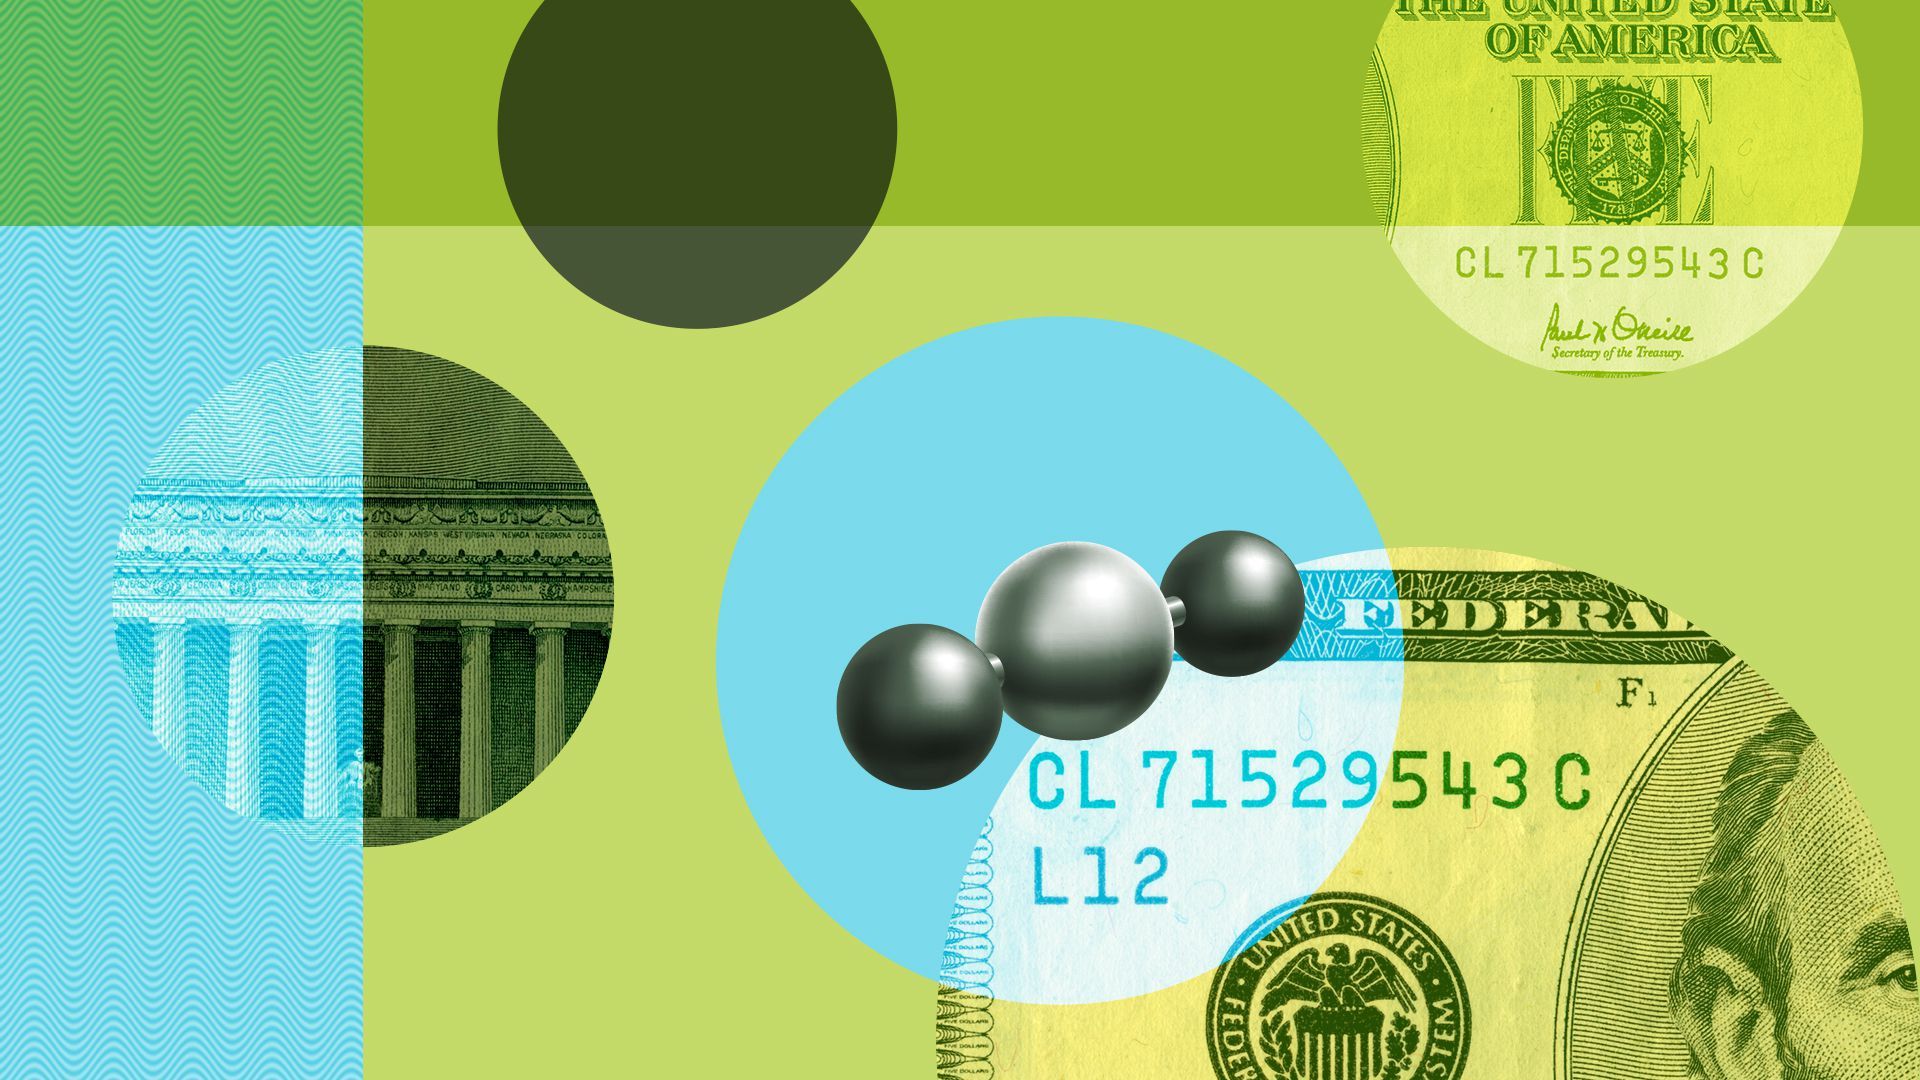 Illustration of a carbon molecule, US currency and geometric shapes